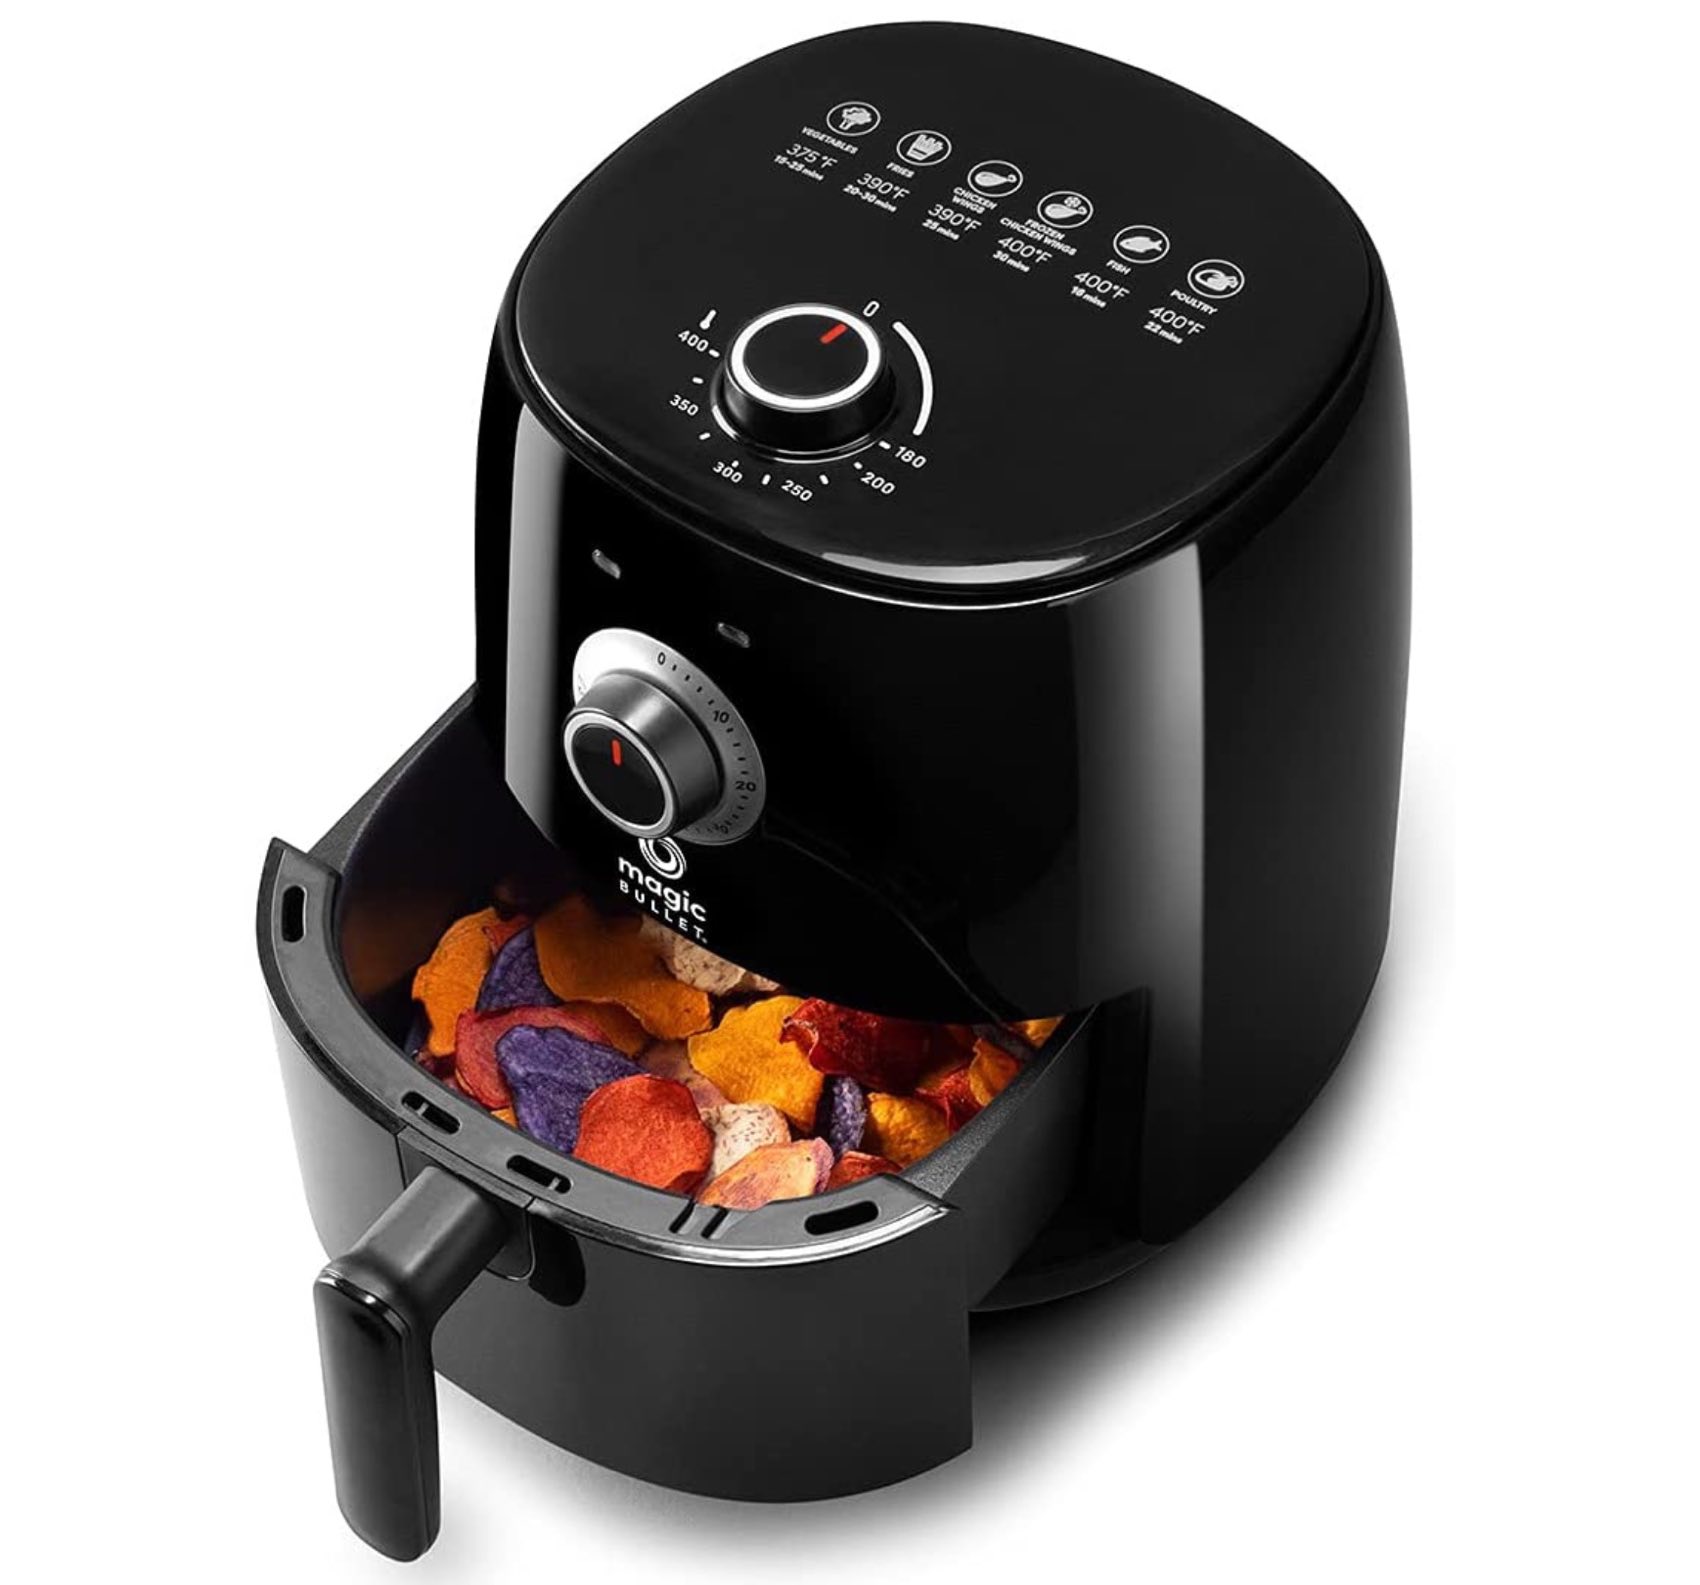 One nice touch is that the top of this air fryer has cooking guidelines for six common foods: veggies, fries, chicken wings, frozen chicken wings, fish, and poultry.